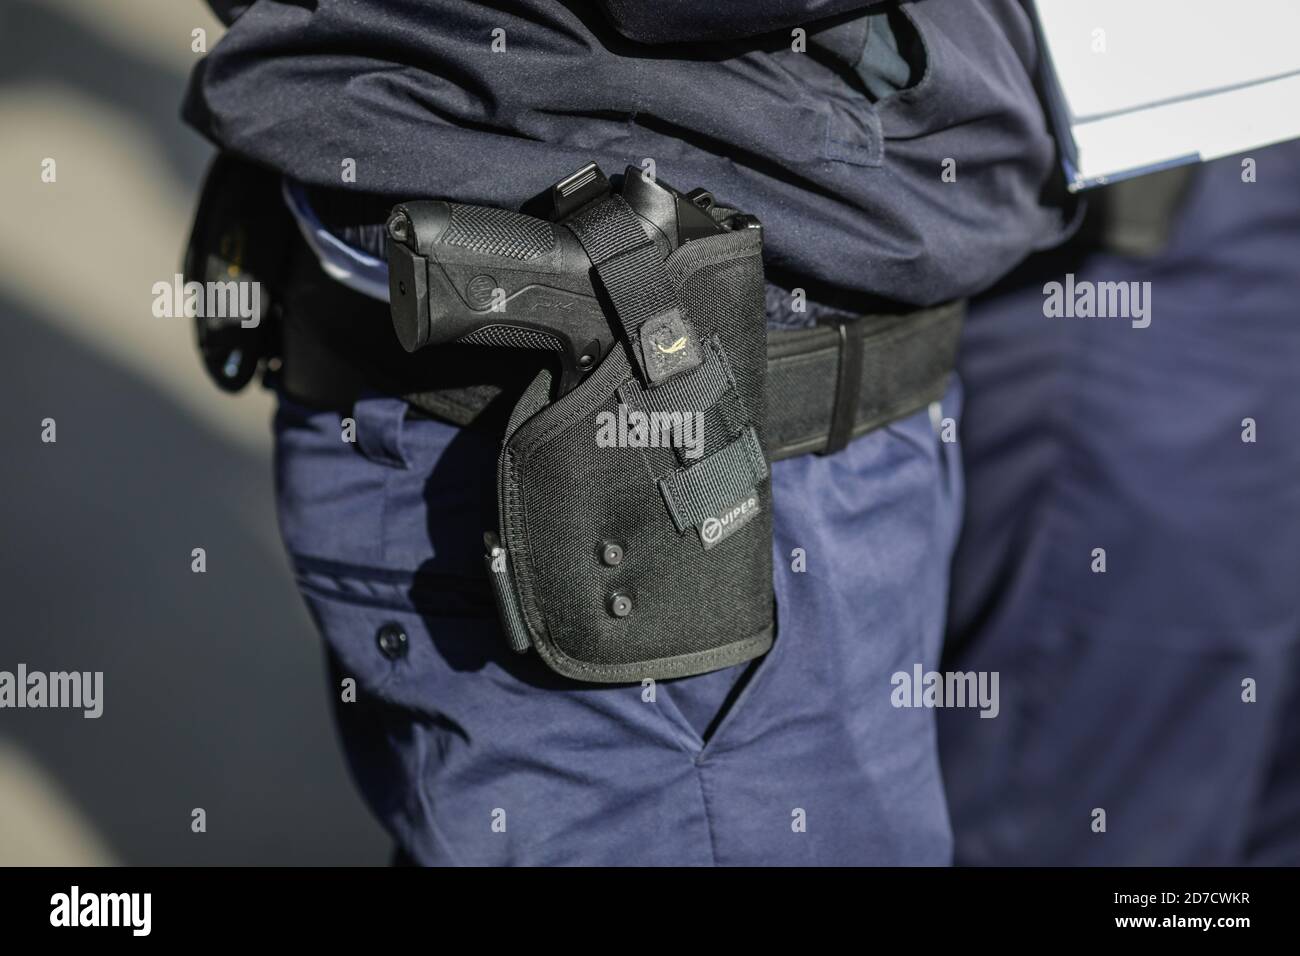 Bucharest, Romania - October 21, 2020: Details with a Beretta PX4 gun in the holster of a police officer. Stock Photo